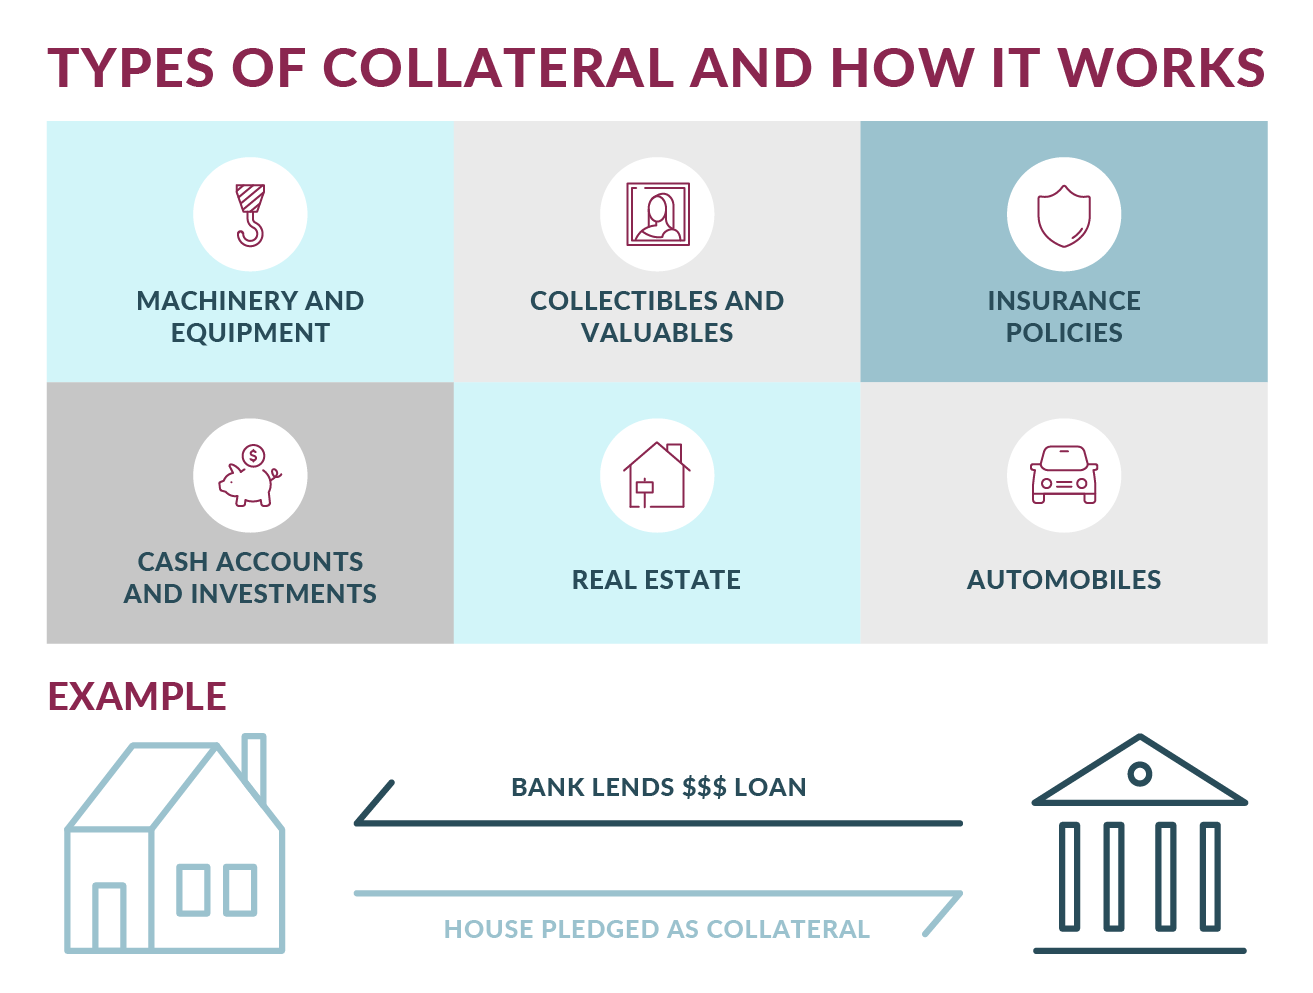 Types of Collateral and How It Works